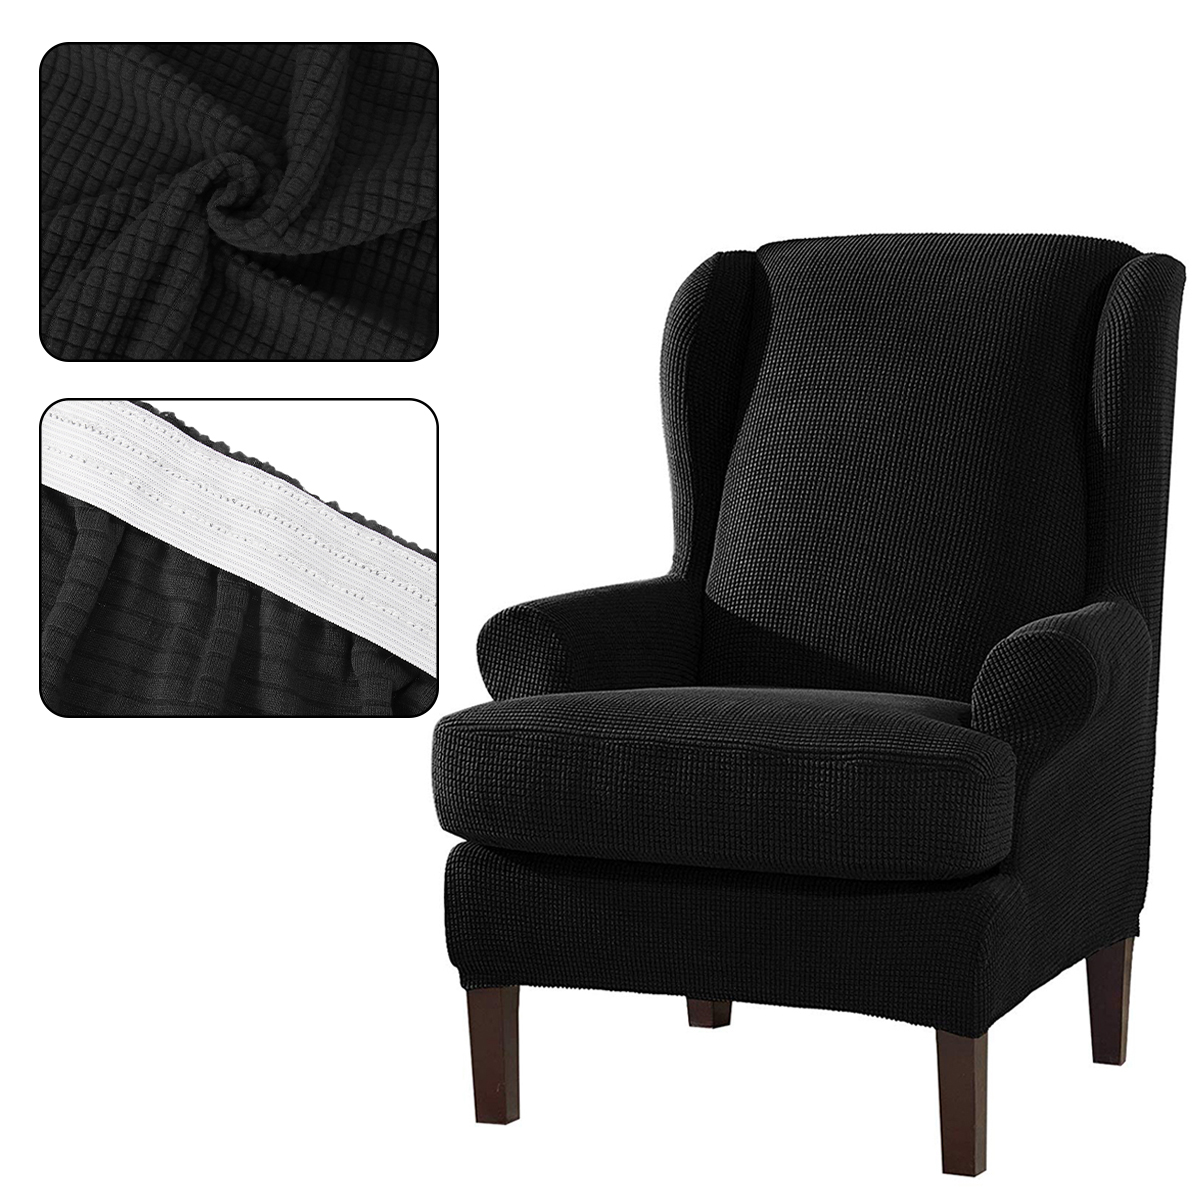 Waterproof-Elastic-Armchair-Wingback-Wing-Chair-Slipcover-Protector-Covers-1635286-2